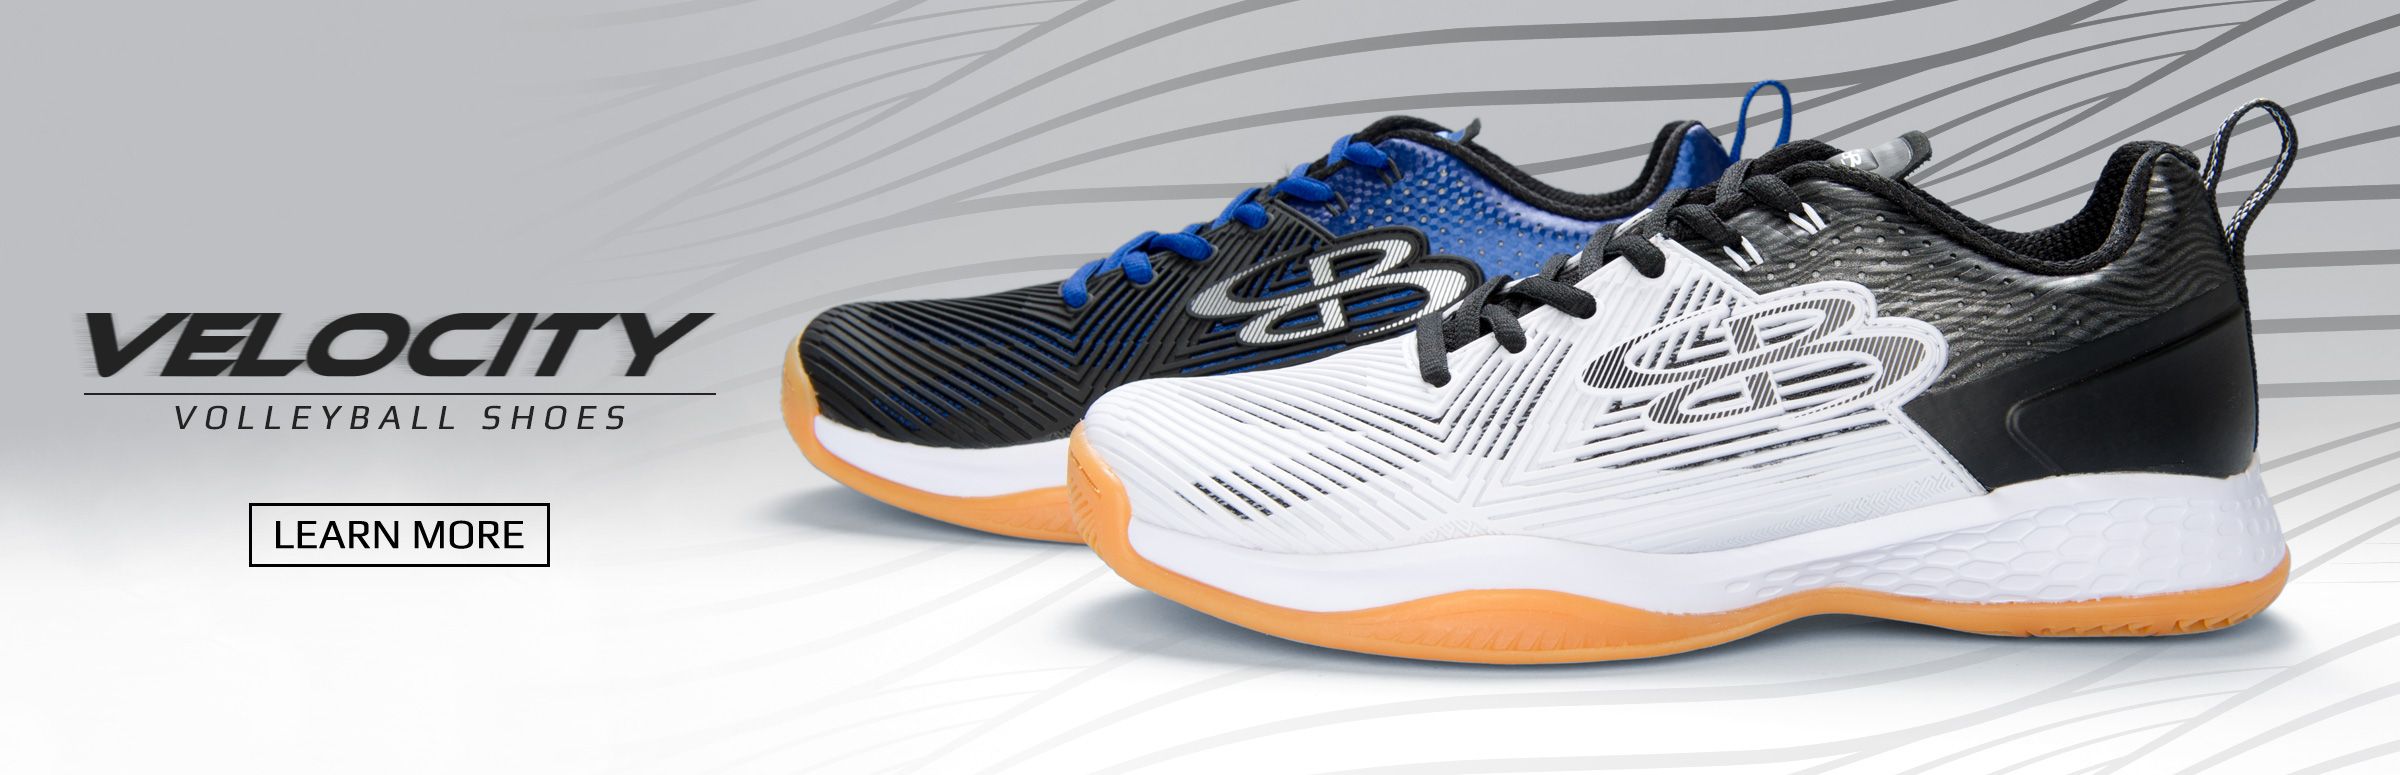 Boombah Velocity Volleyball Shoes